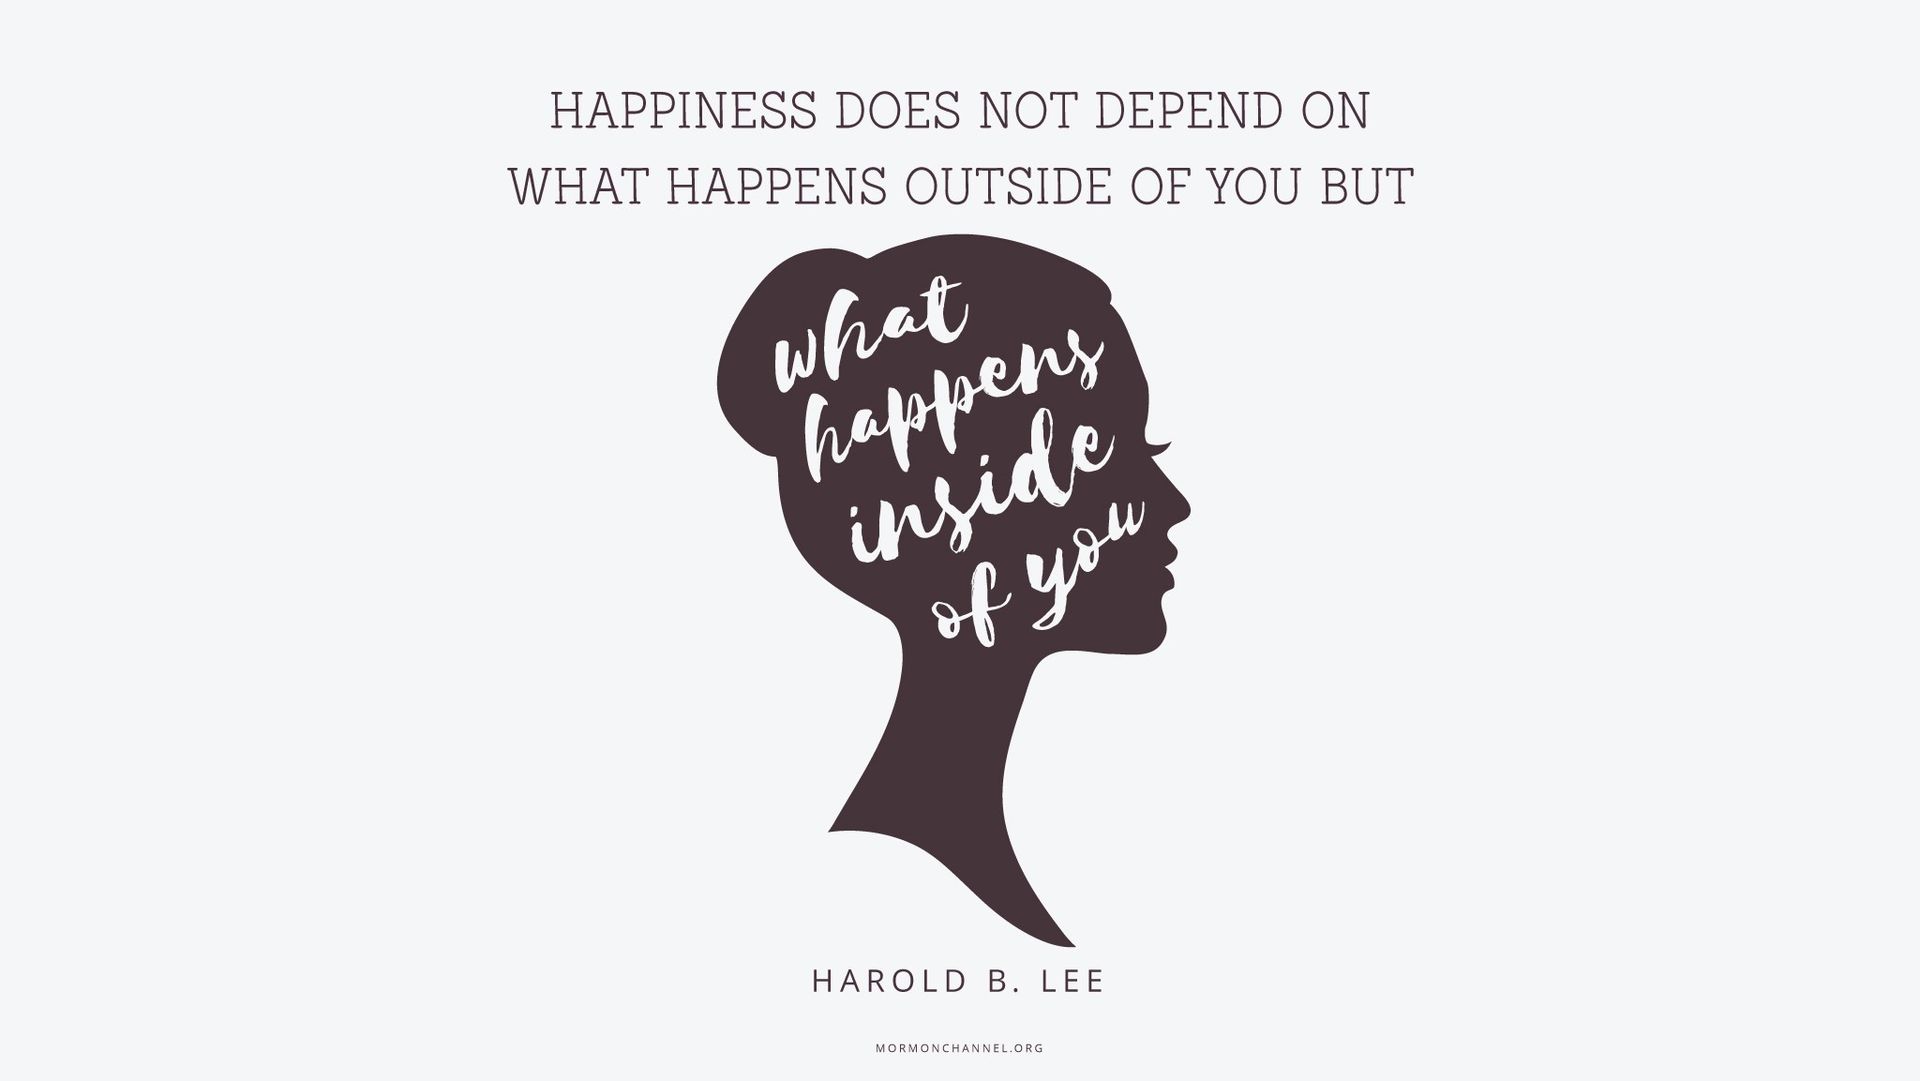 “Happiness does not depend on what happens outside of you but on what happens inside of you.”—President Harold B. Lee, “A Sure Trumpet Sound: Quotations from President Lee”